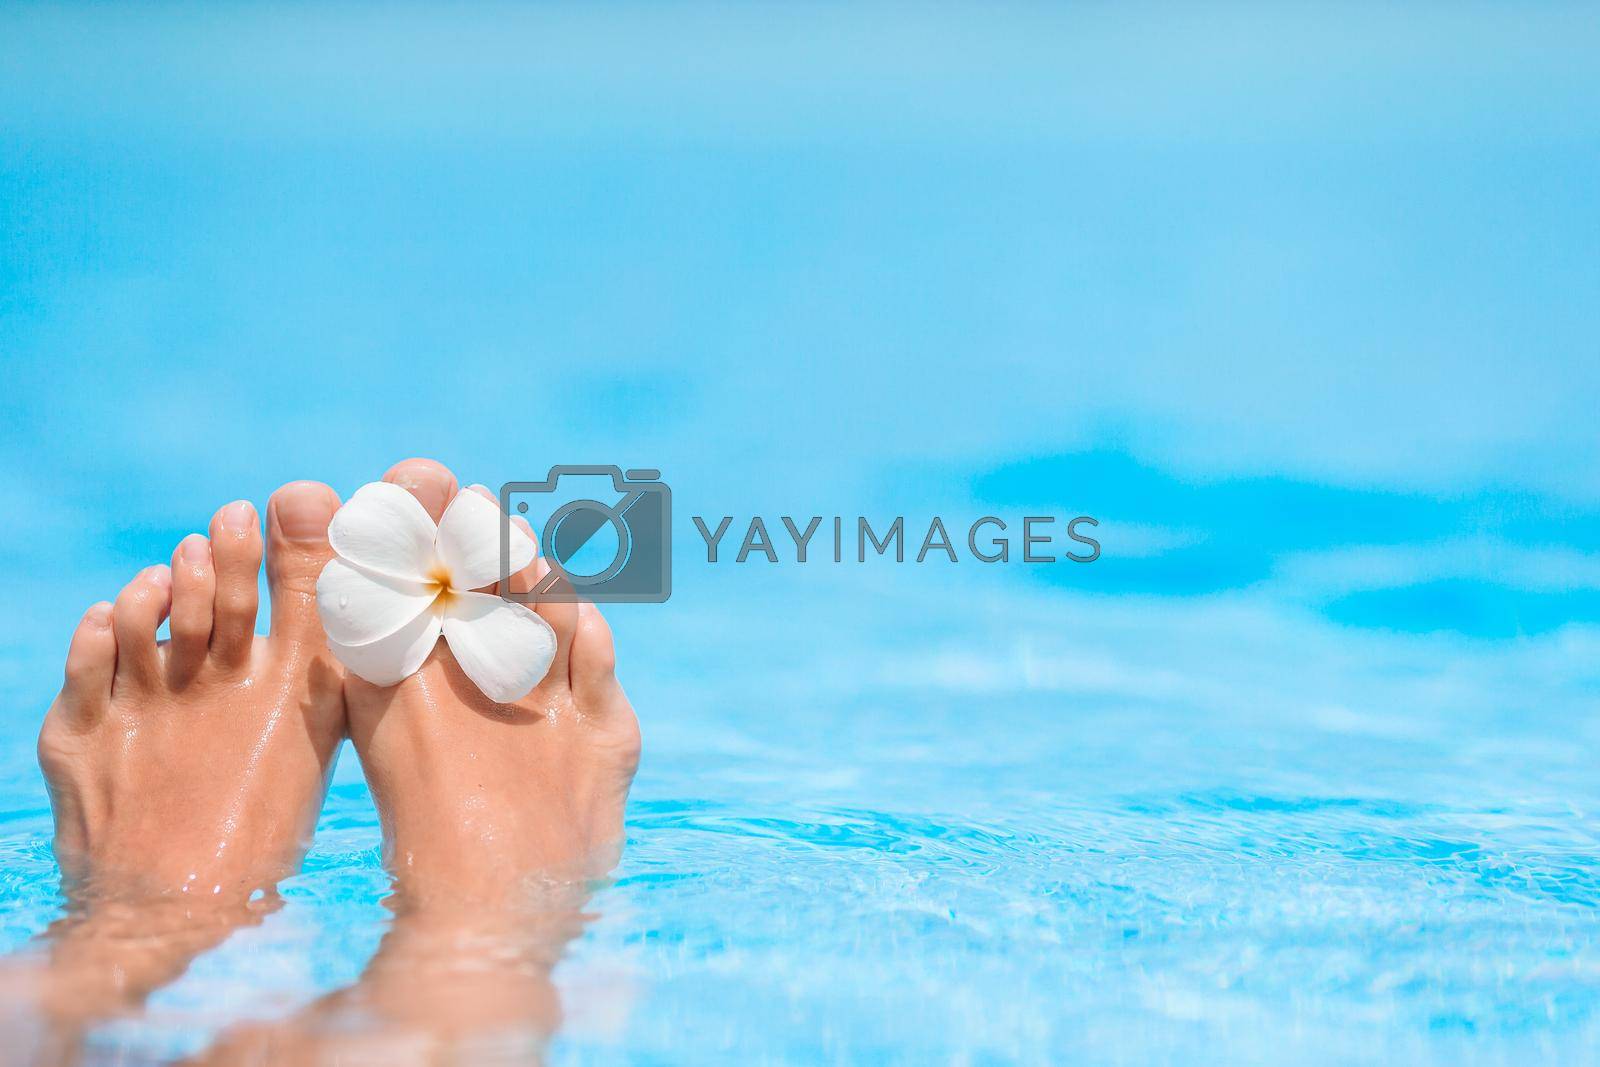 Royalty free image of Feet in blue pool with tropical flower by travnikovstudio